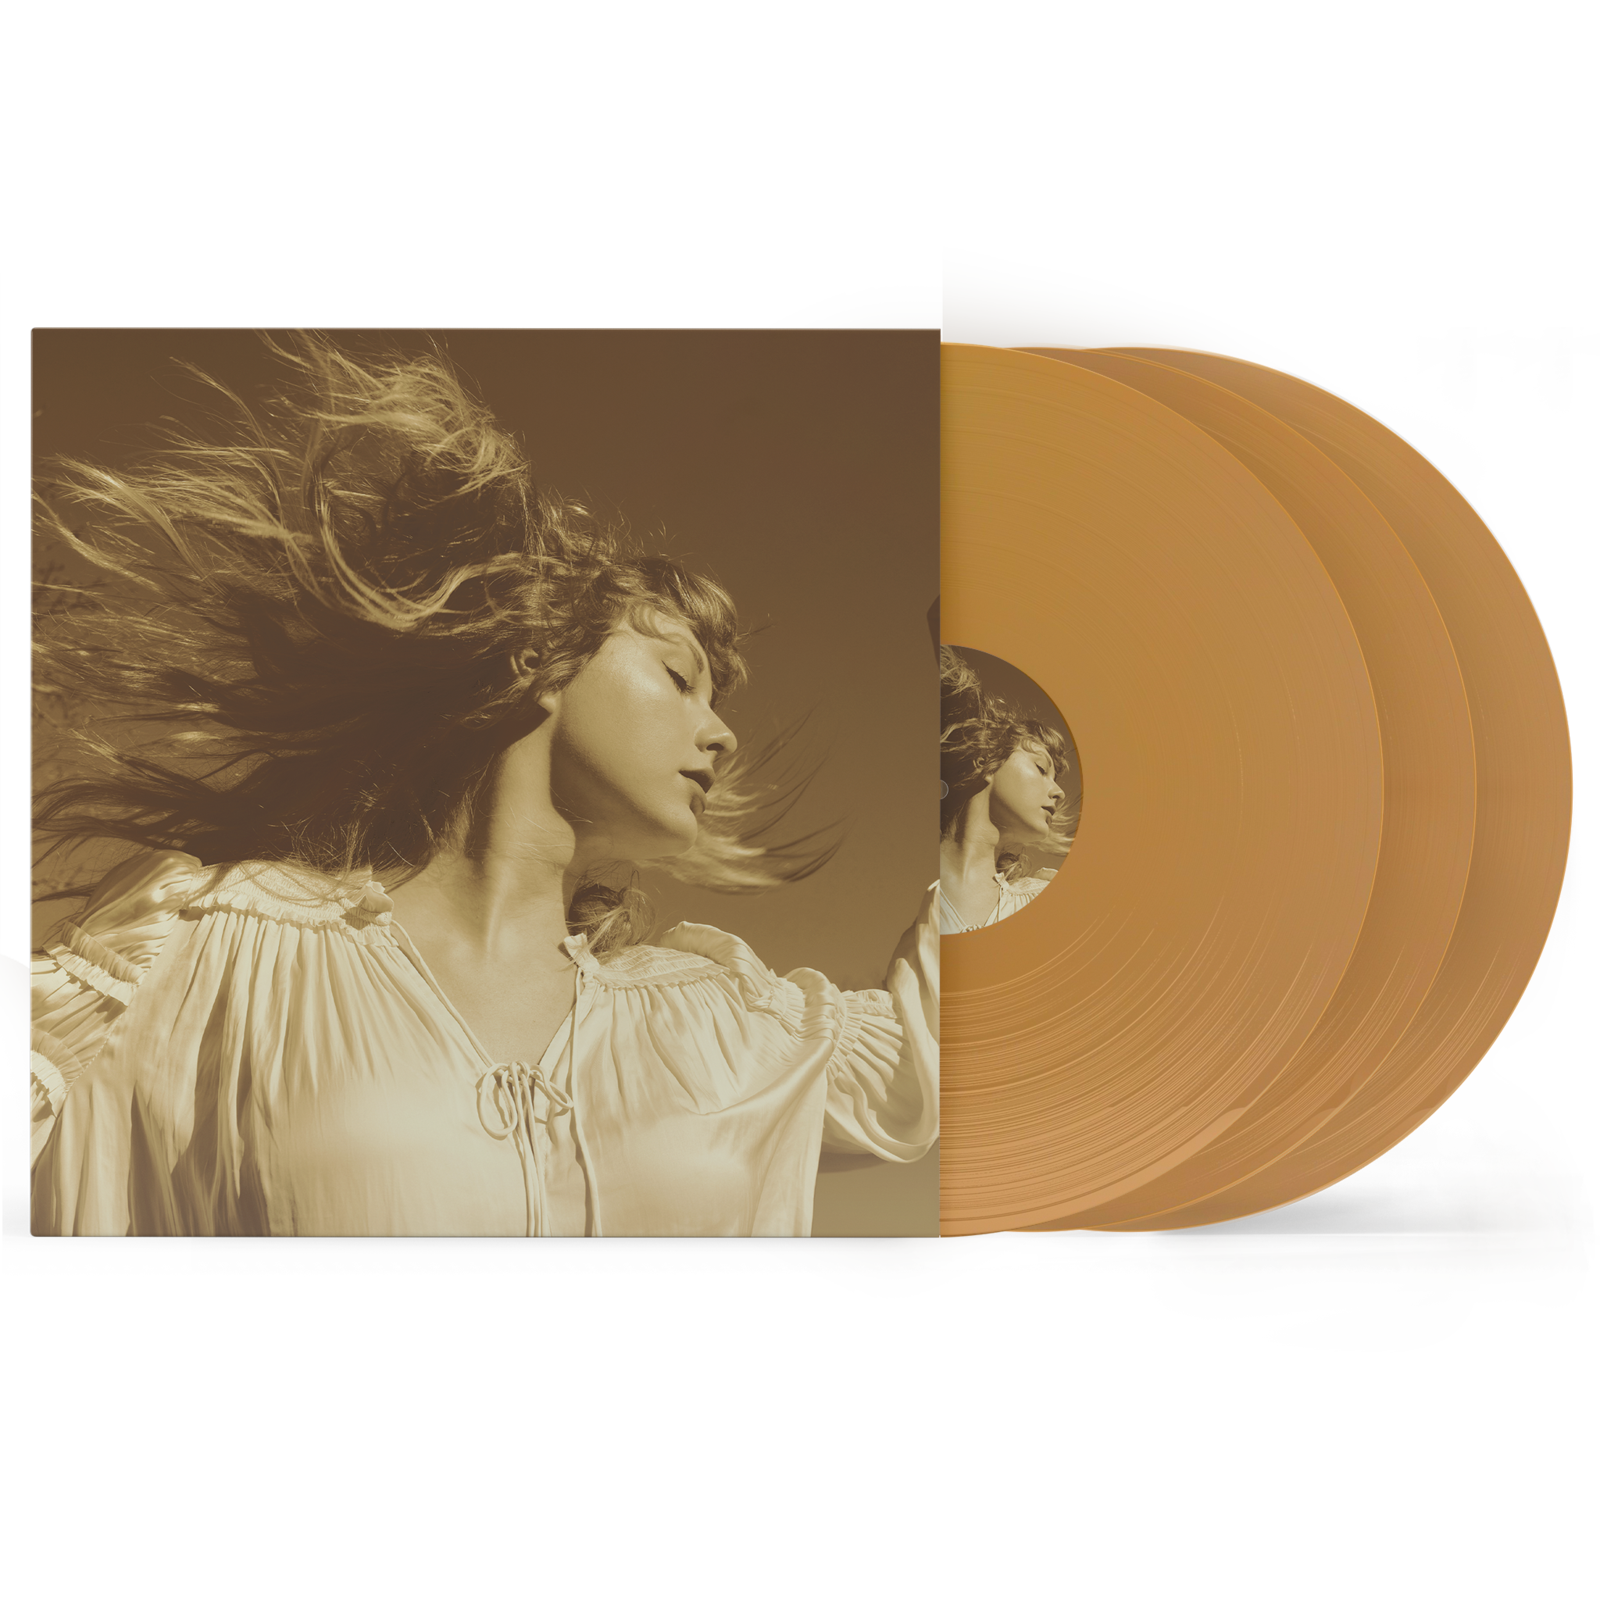 Fearless (Taylor's Version) vinyl - Taylor Swift Official Store